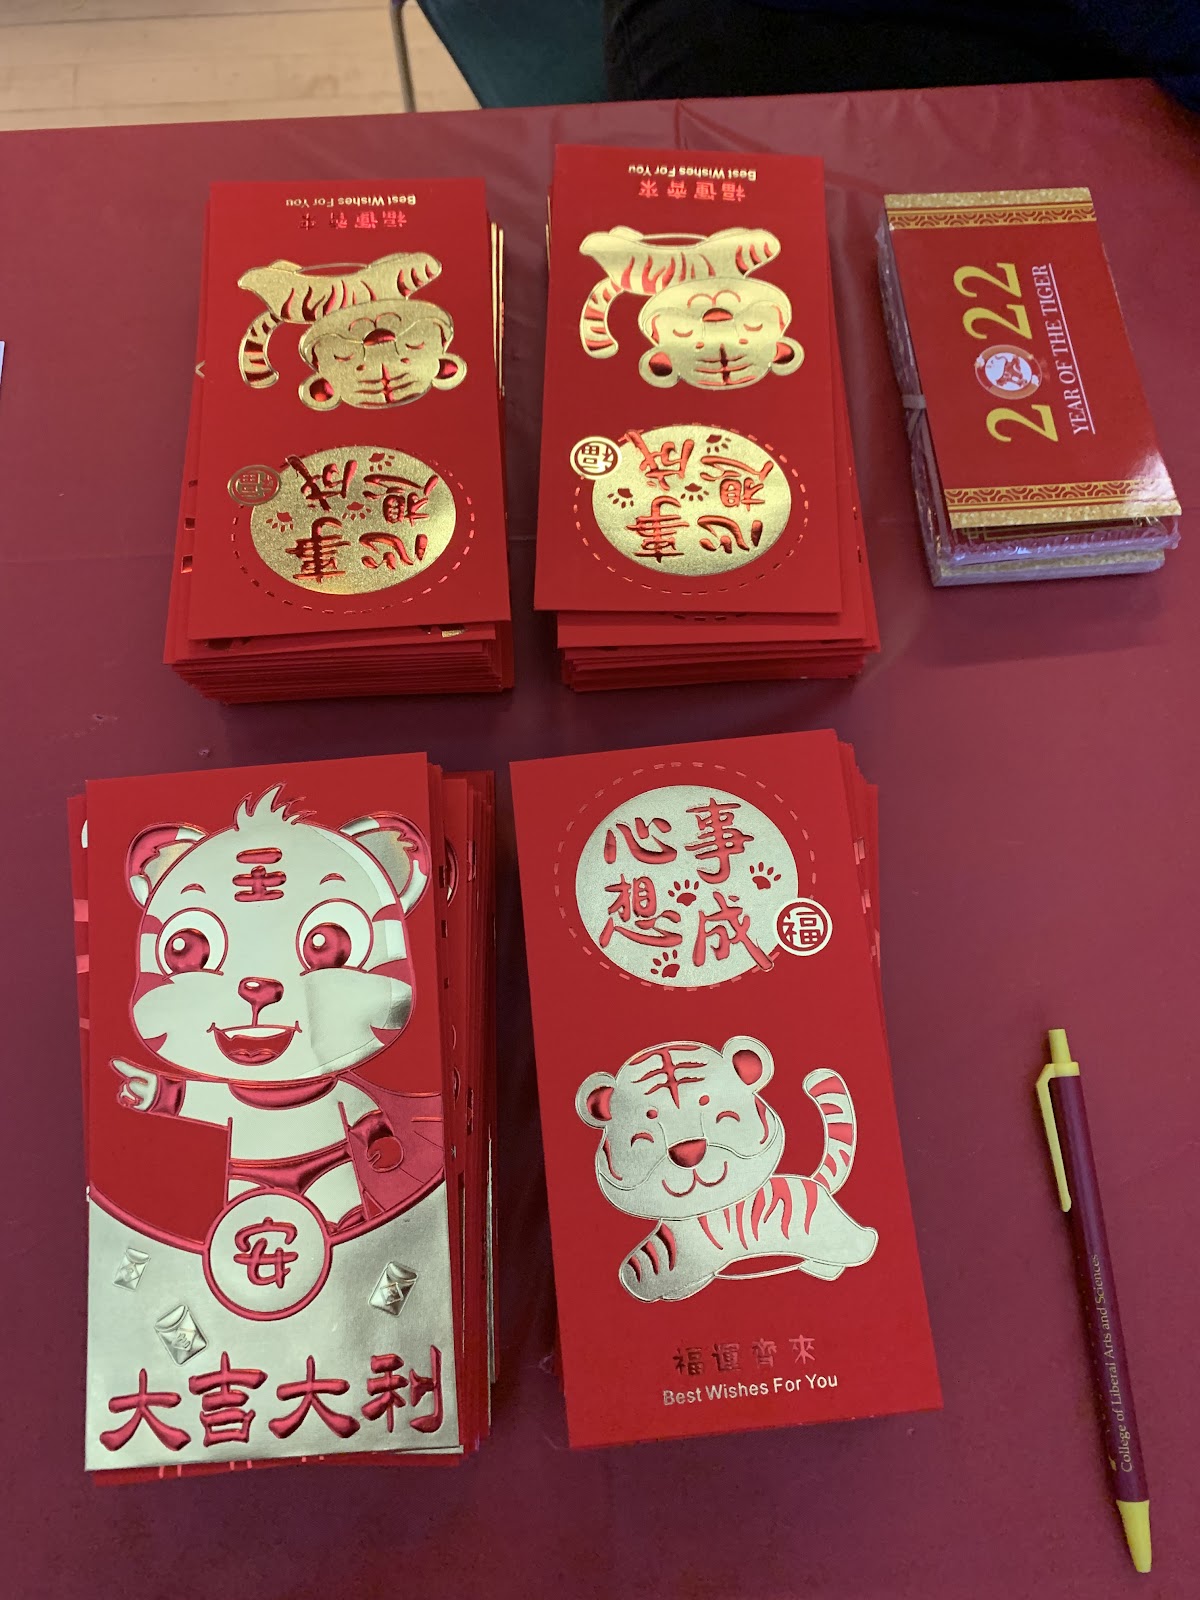 Lunar new year cards laid out on a red-clothed table 